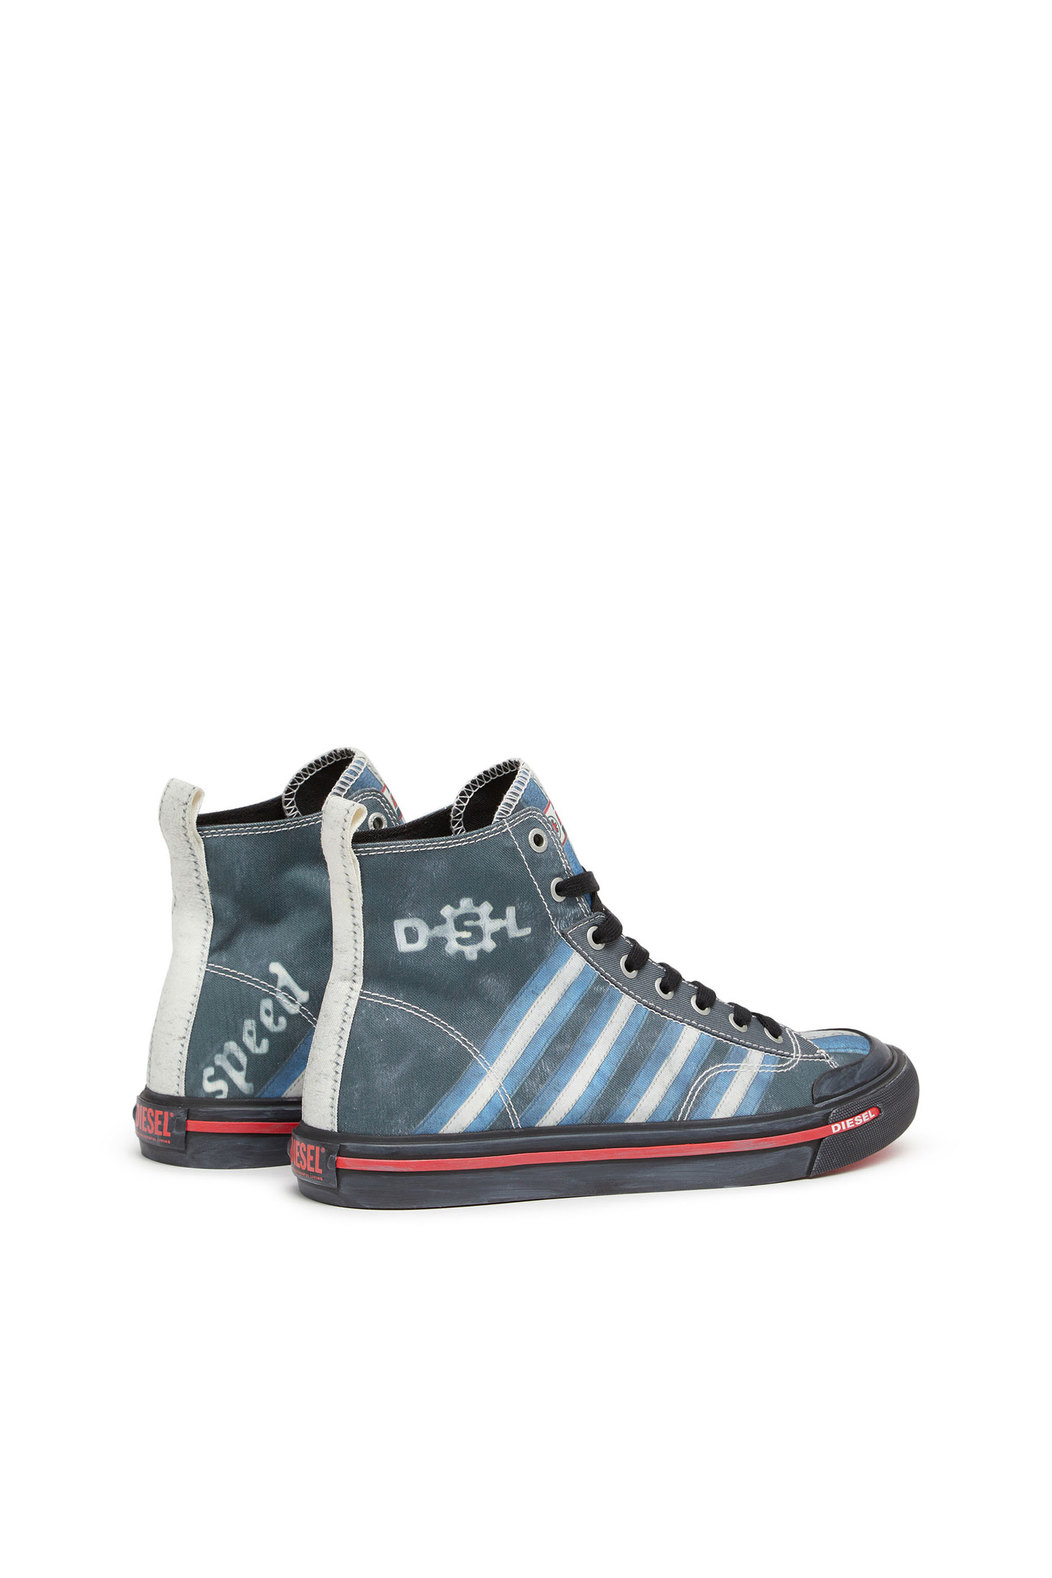 S-Athos Mid - High-top sneaker with all-over print